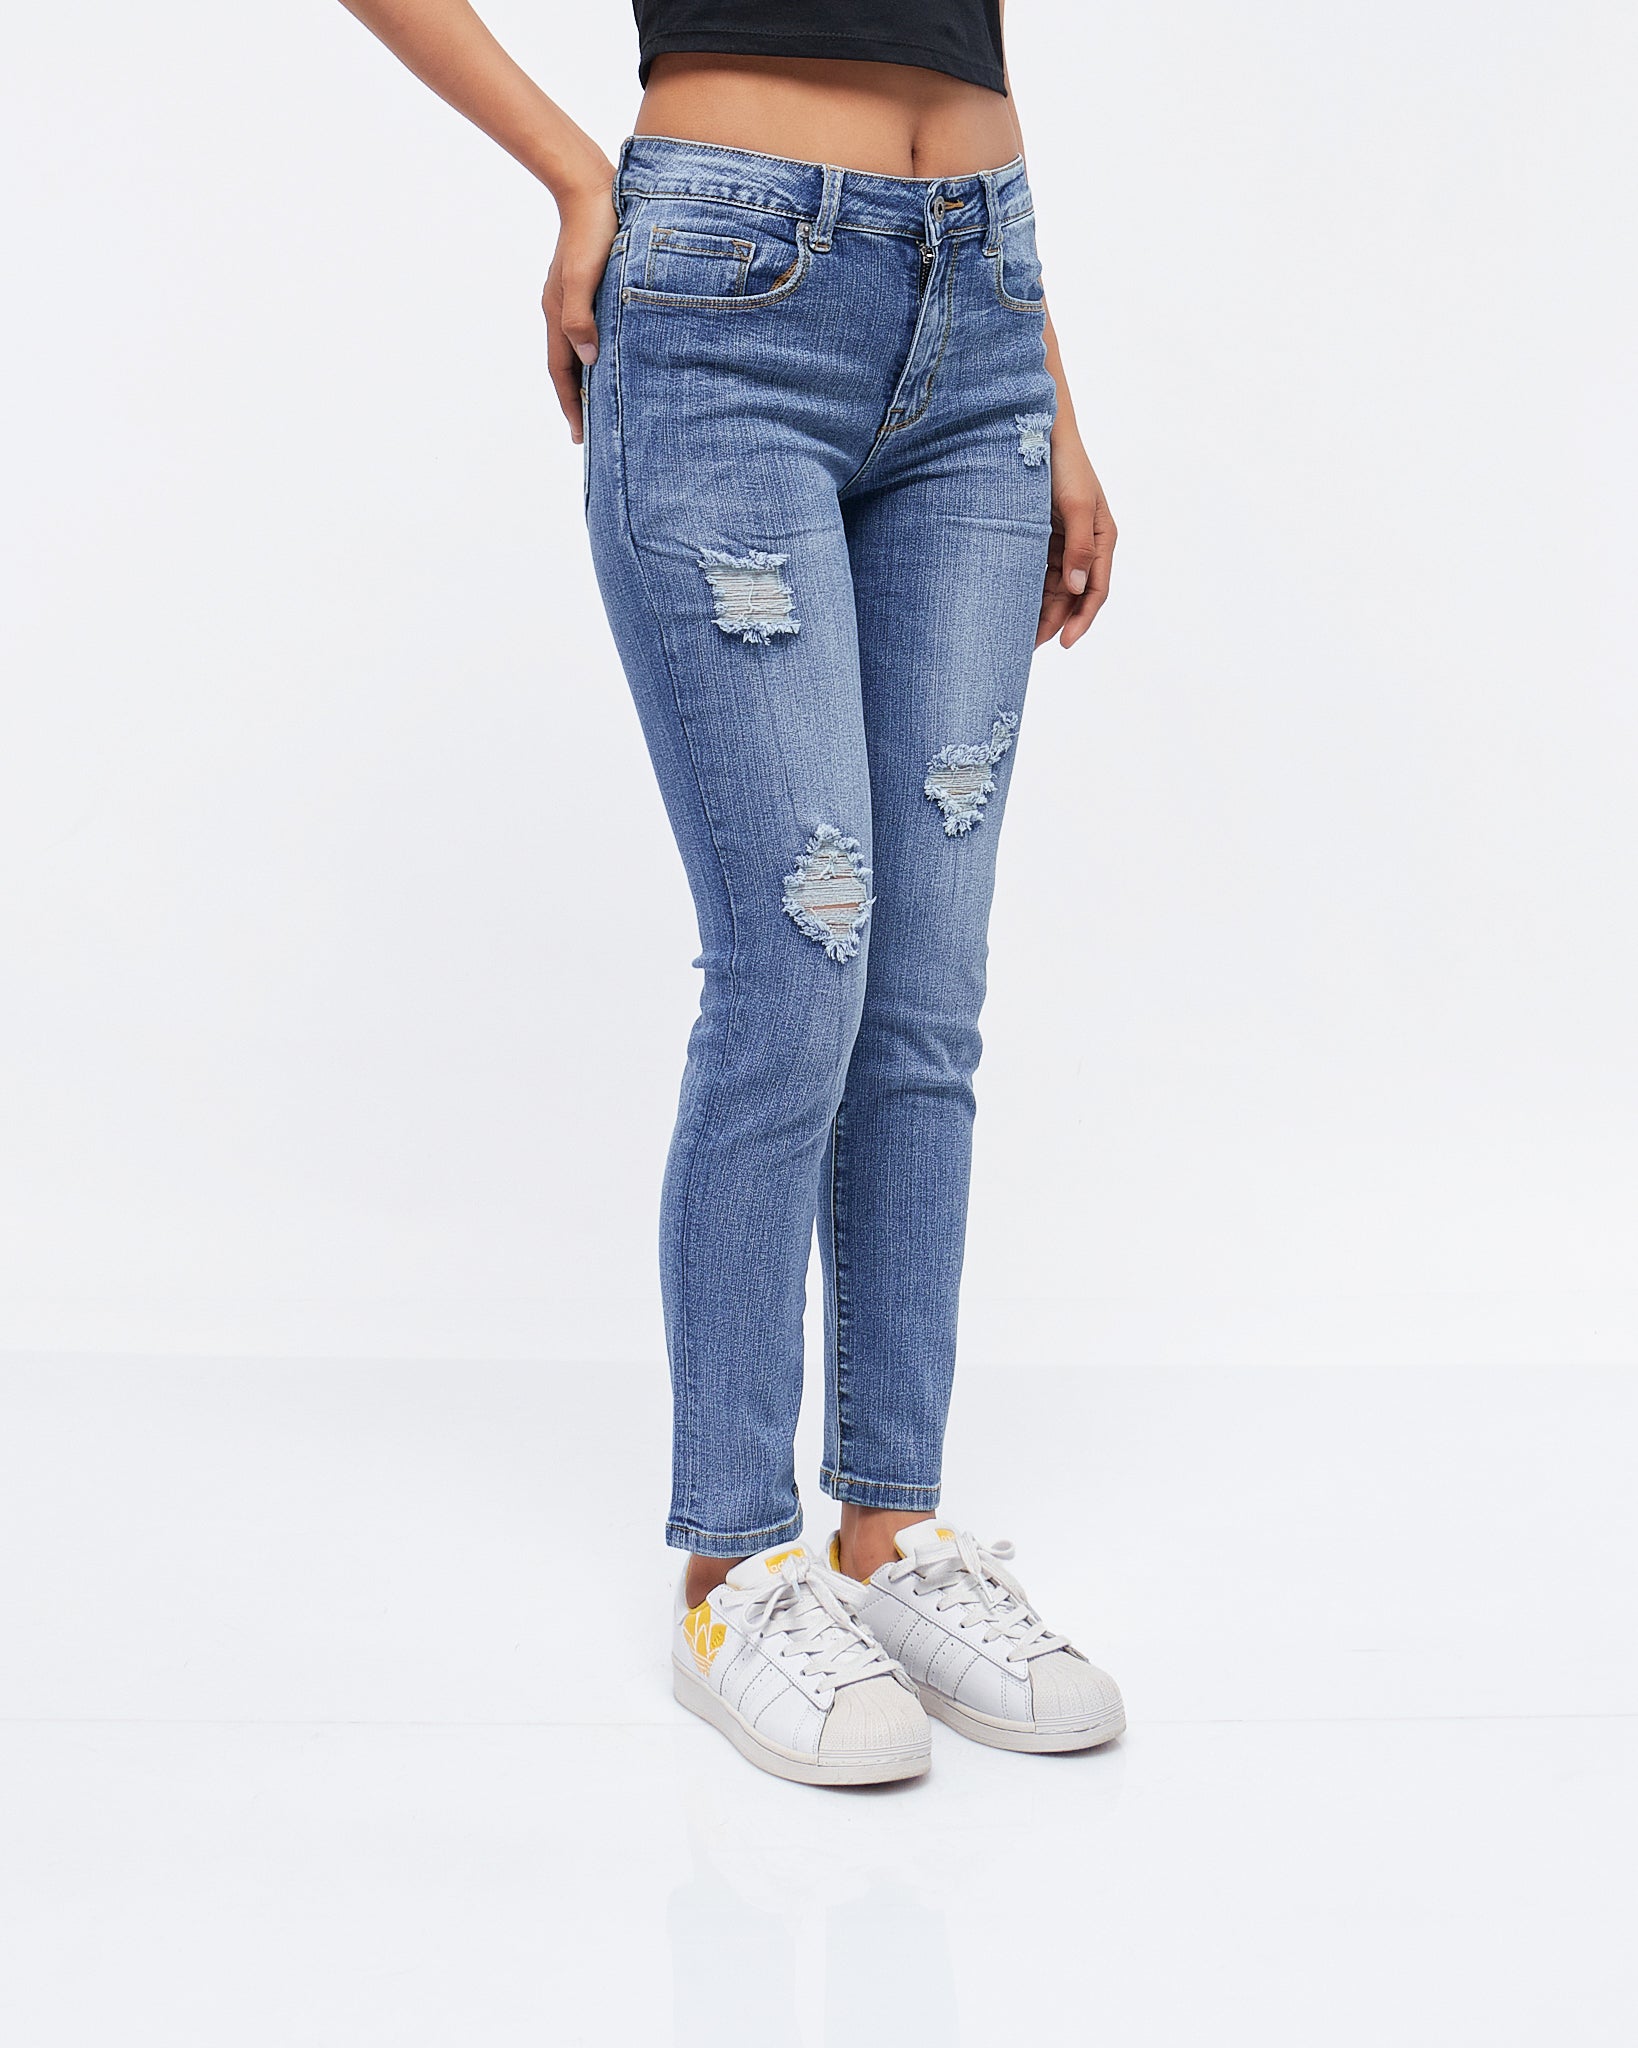 MOI OUTFIT-Distress Slim Fit 711 Lady Jeans 19.90